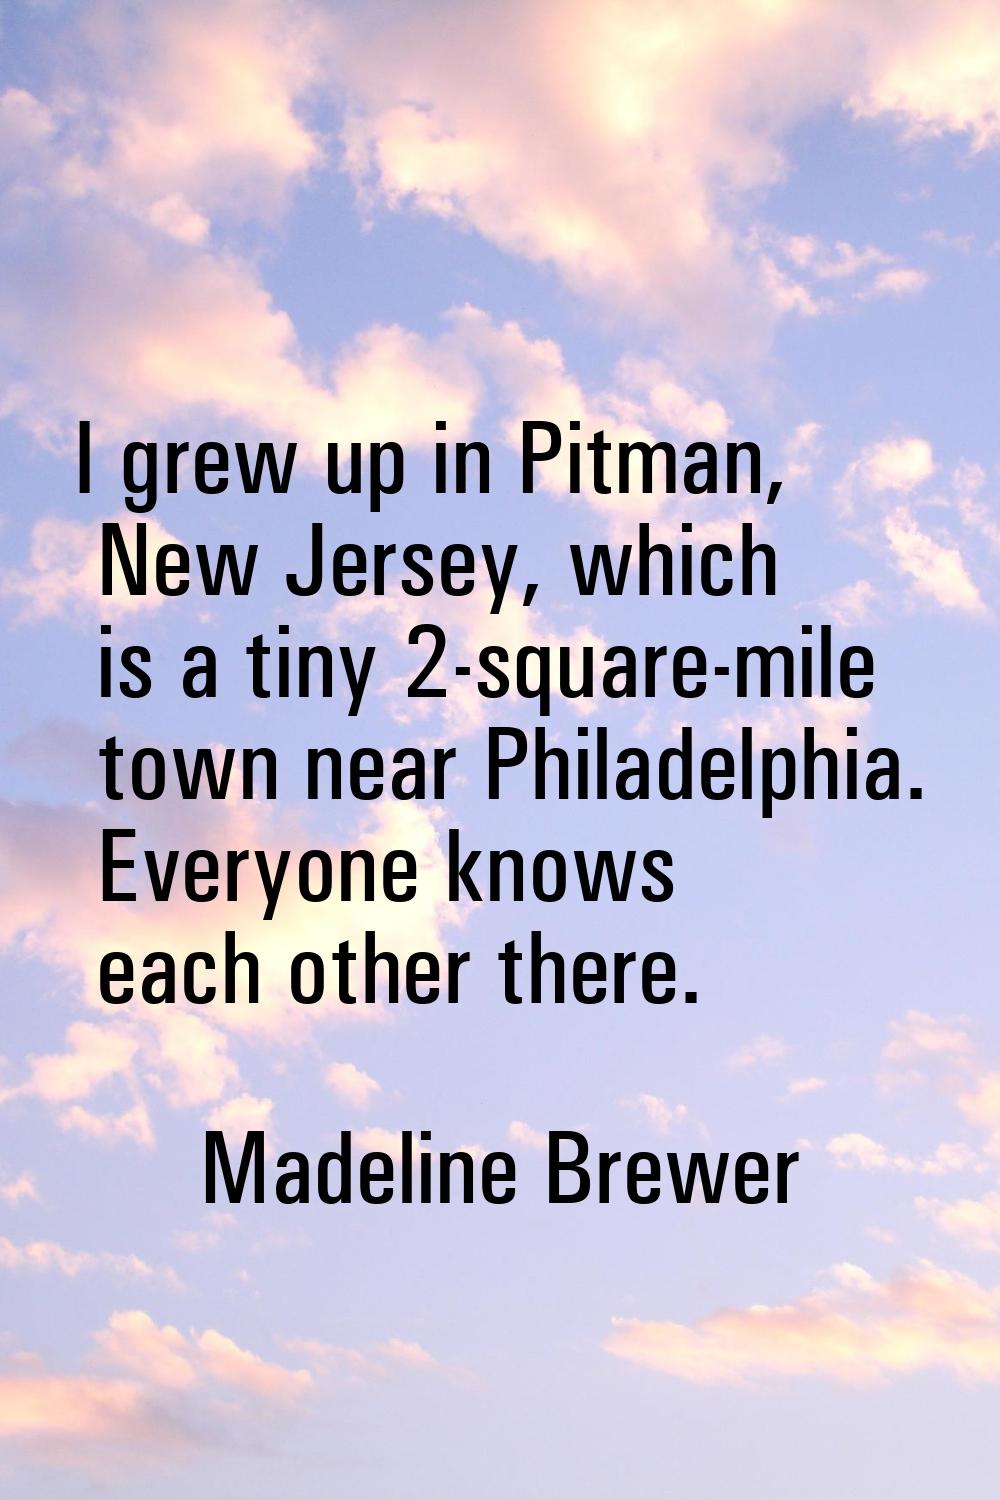 I grew up in Pitman, New Jersey, which is a tiny 2-square-mile town near Philadelphia. Everyone kno